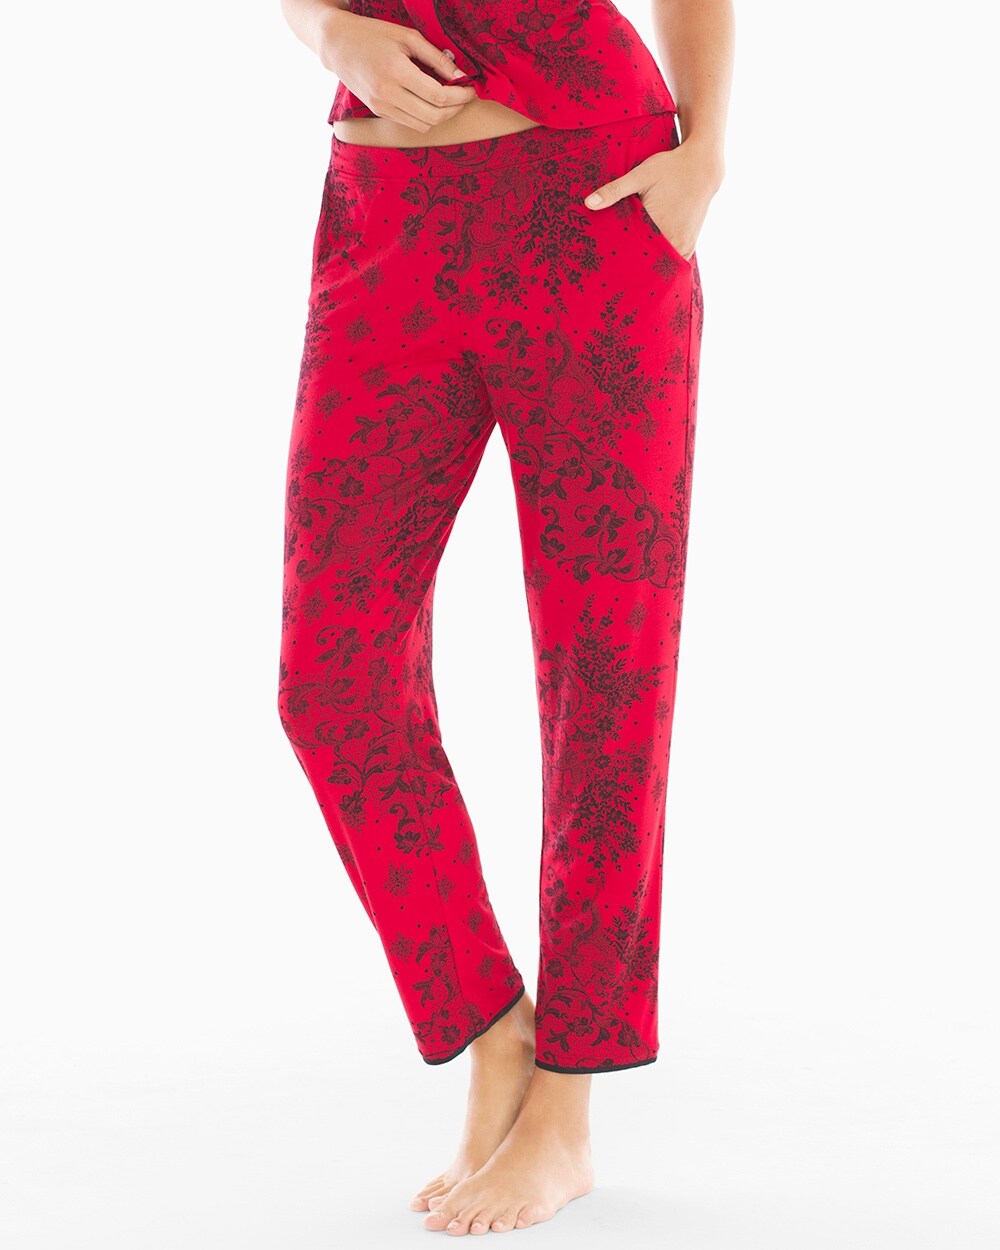 Cool Nights Satin Trim Pajama Ankle Pant Fine Lace Festive Red